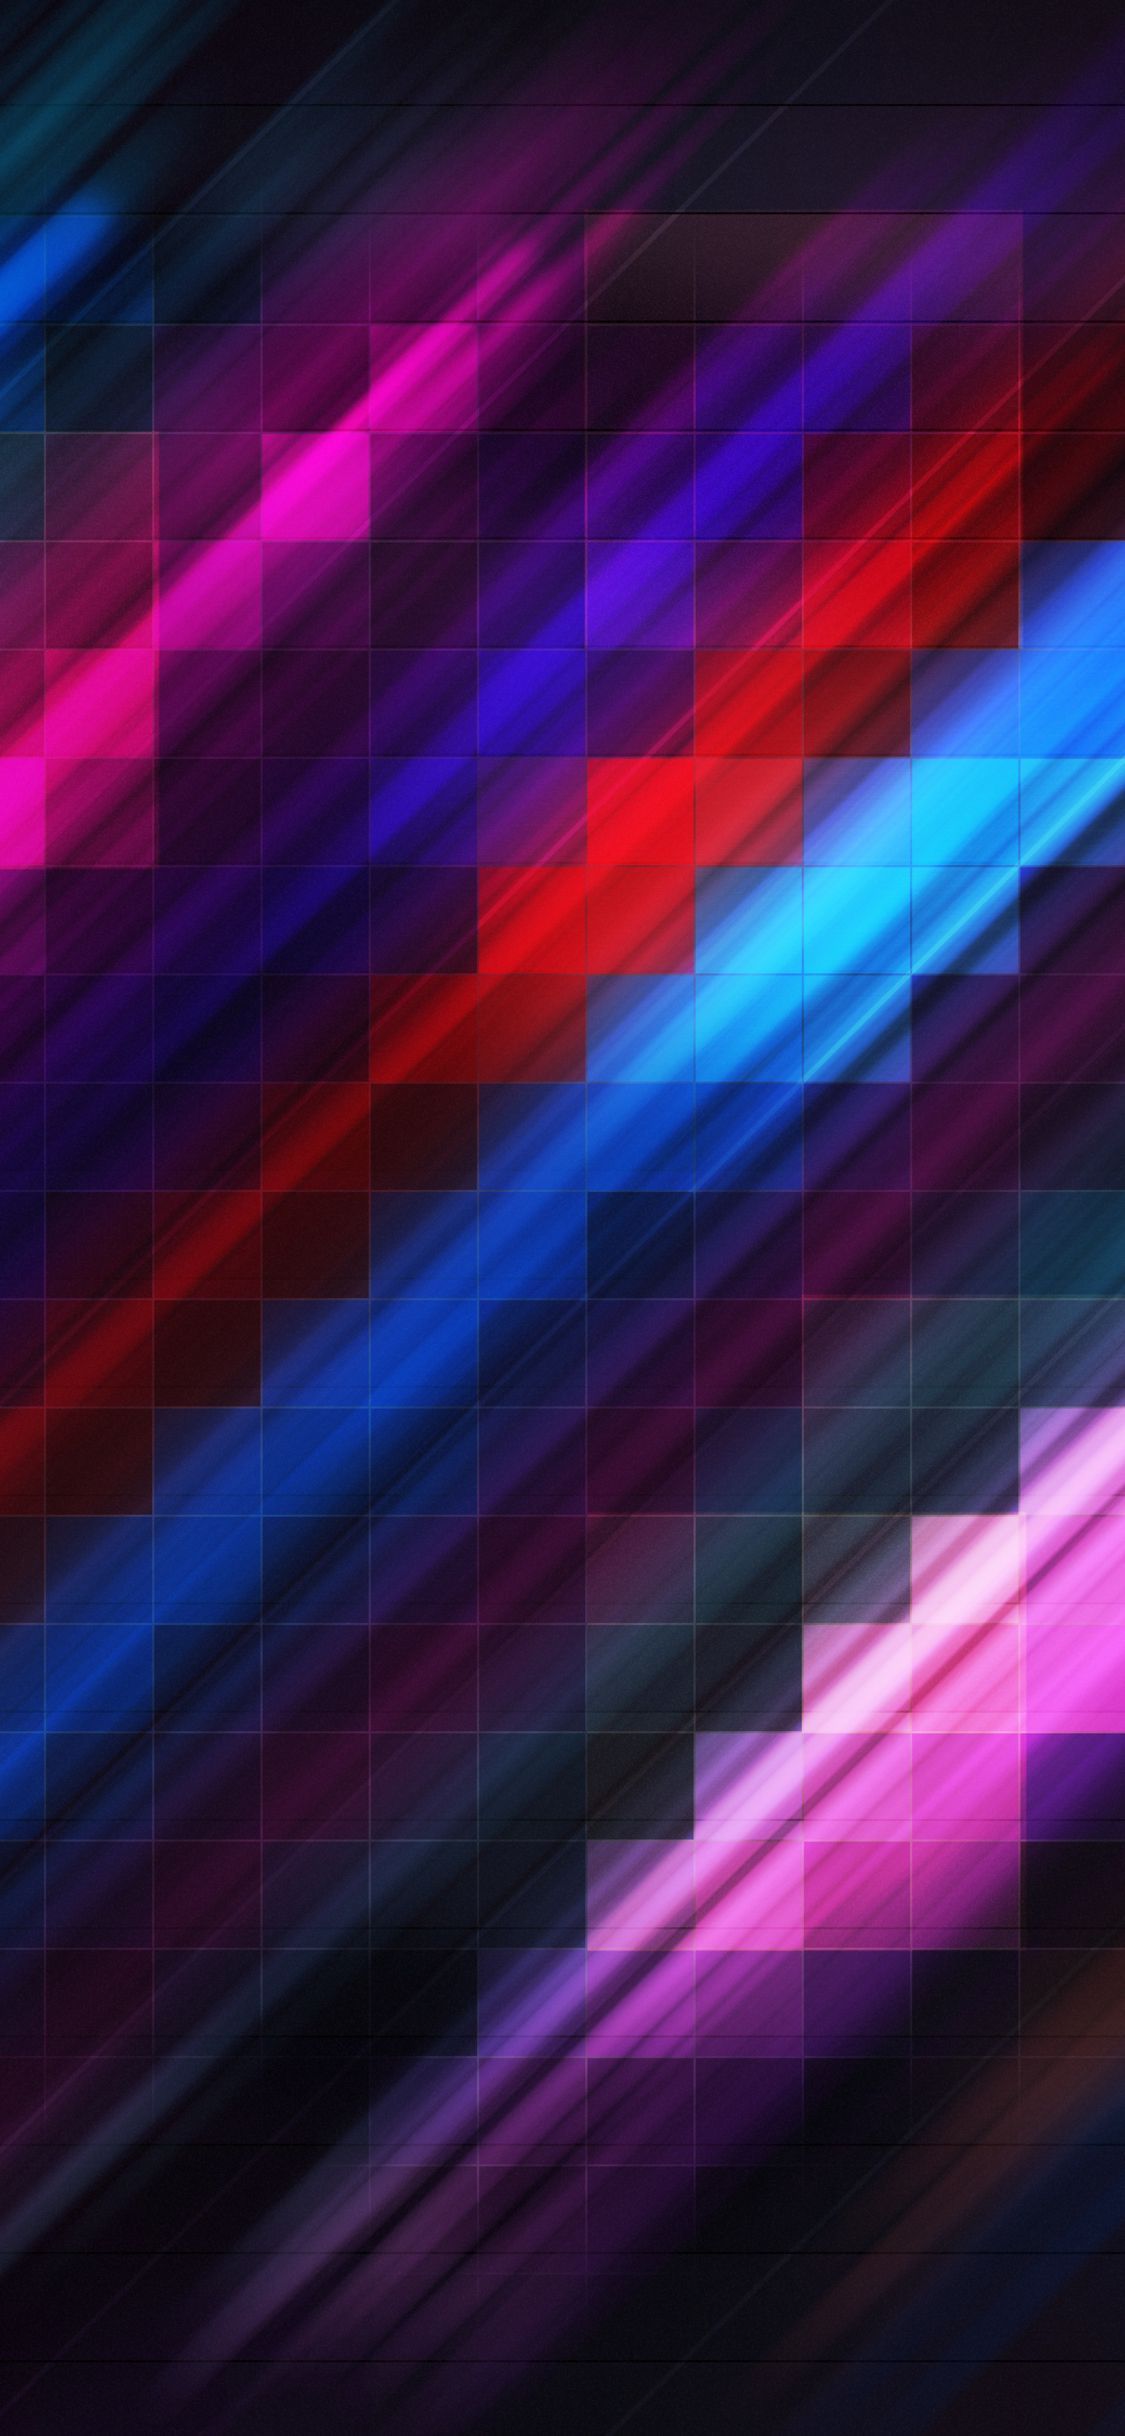 4k Resolution Abstract Wallpaper 4k iPhone